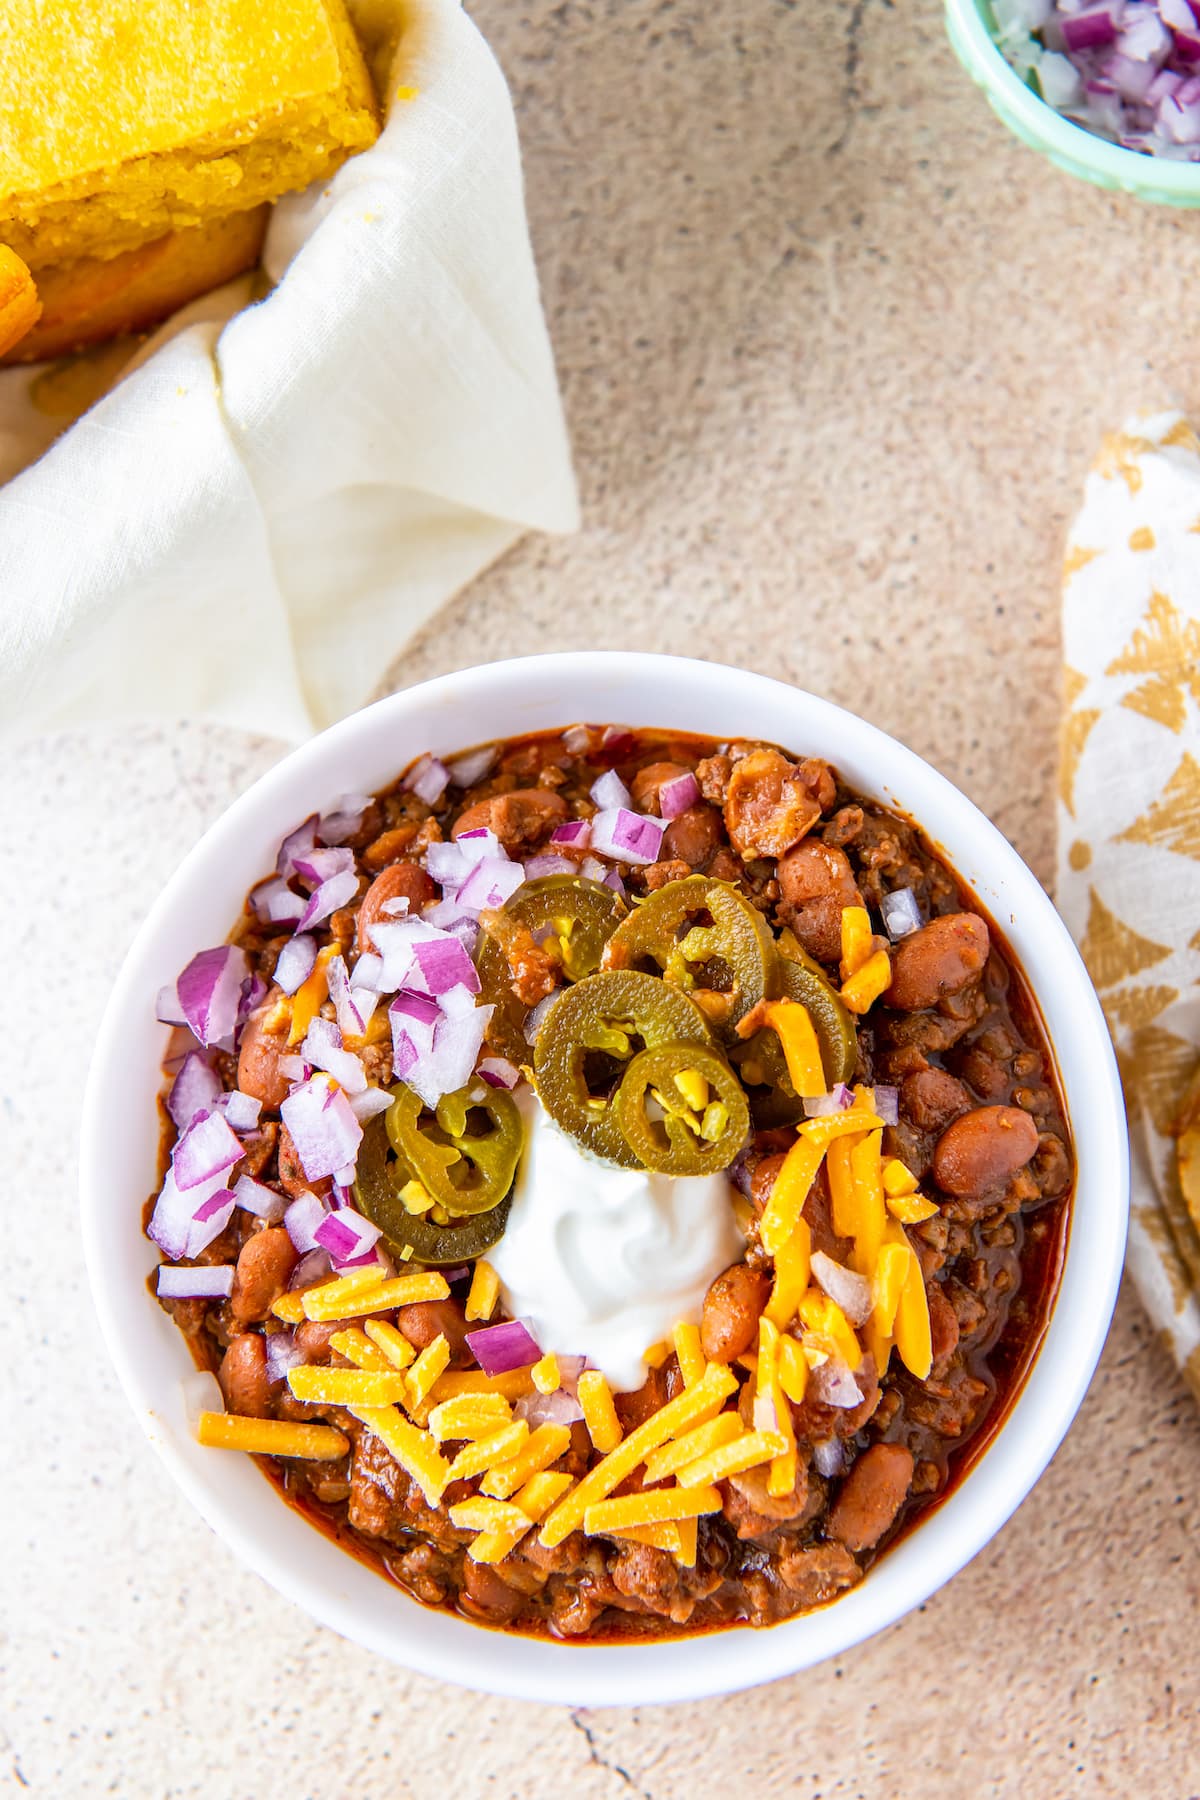 a bowl of chili with toppings like cheese, sour cream, red onion, and pickled jalapenos